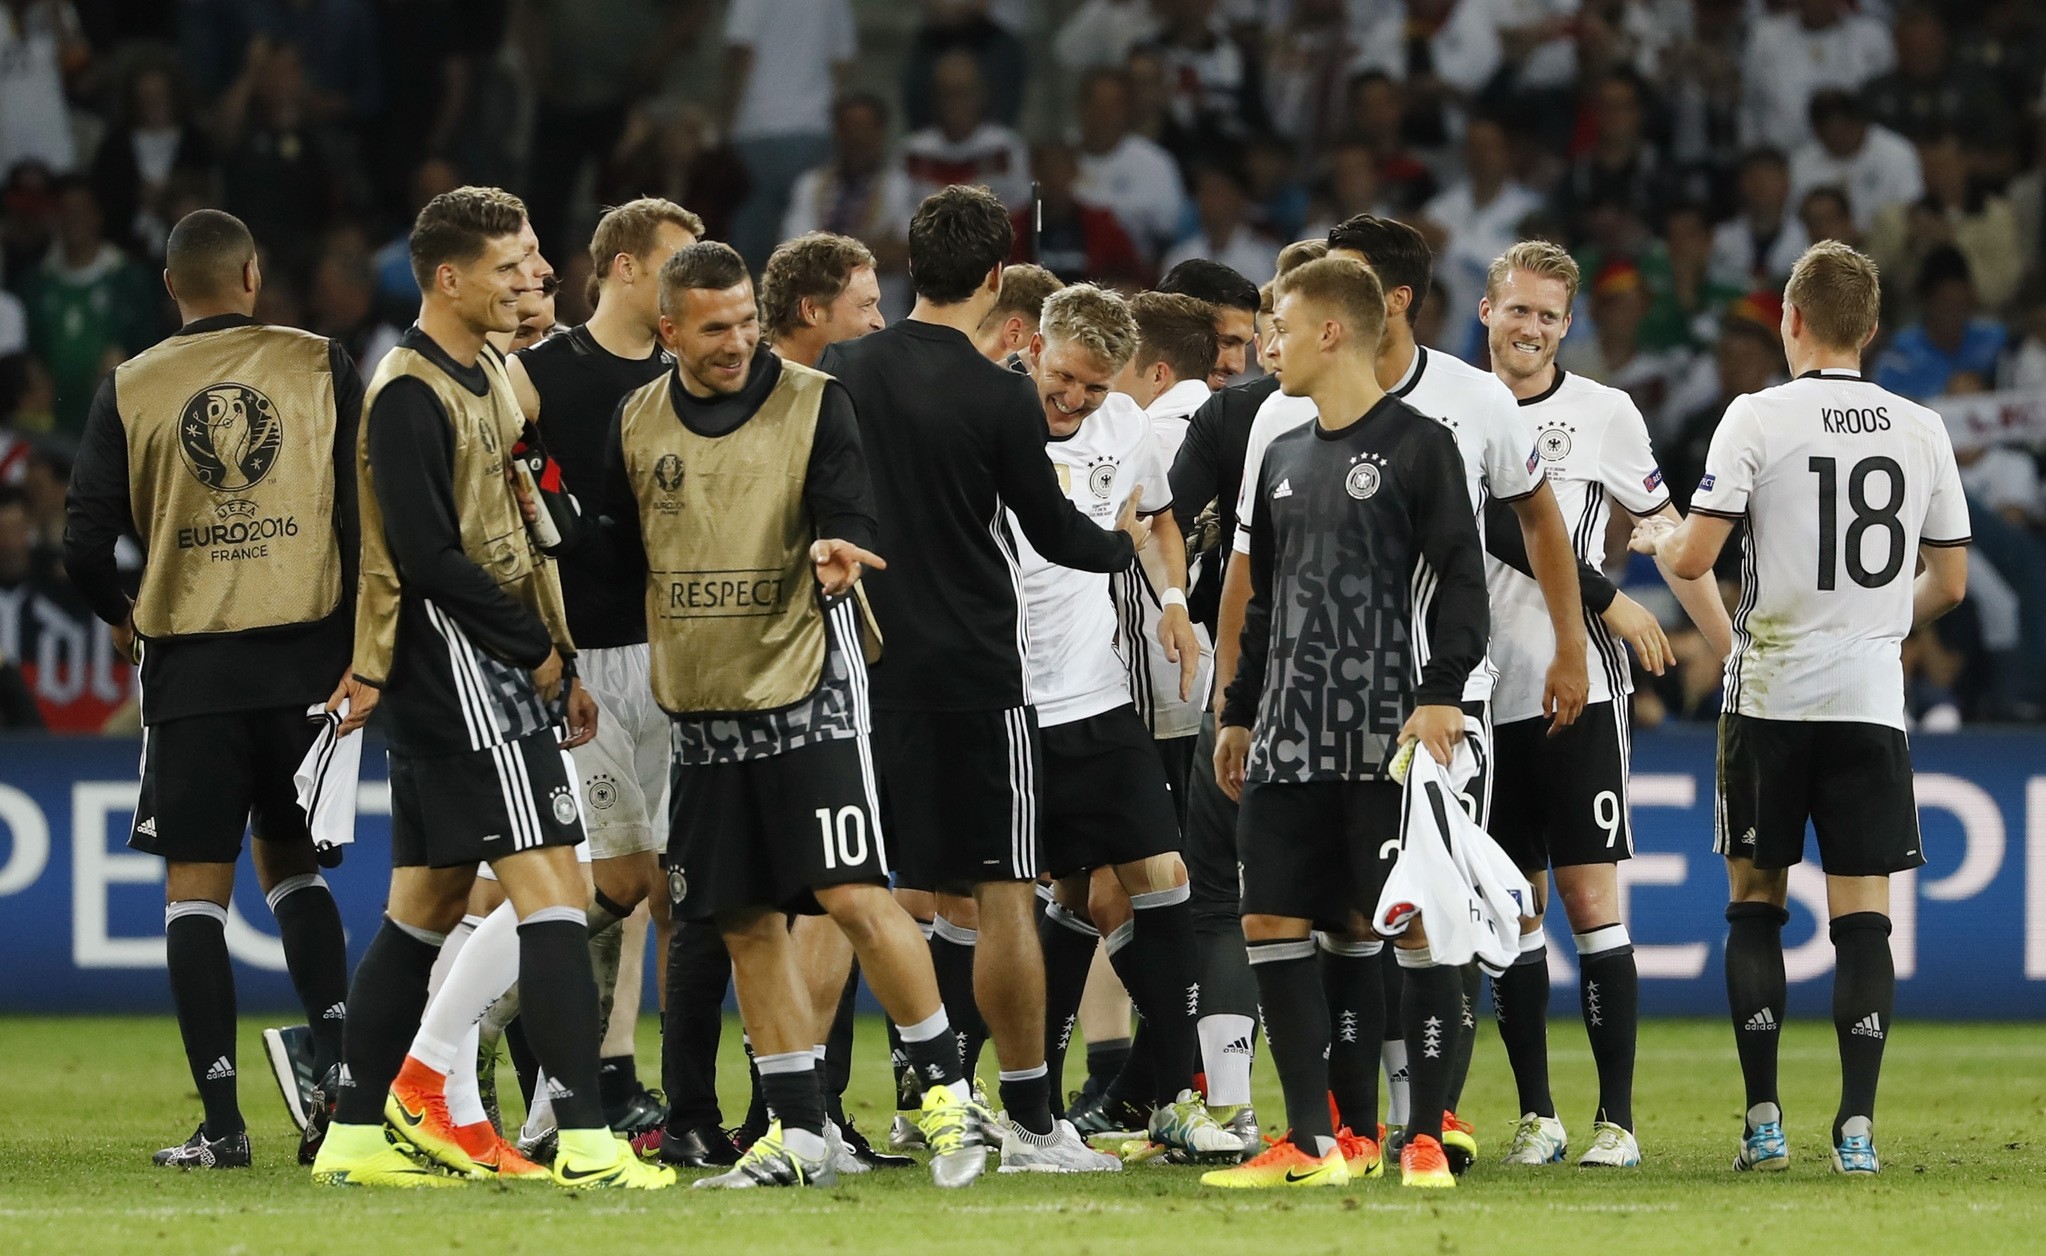 Germany's Bastian Schweinsteiger celebrates with team mates at the end of the match (REUTERS Photo)